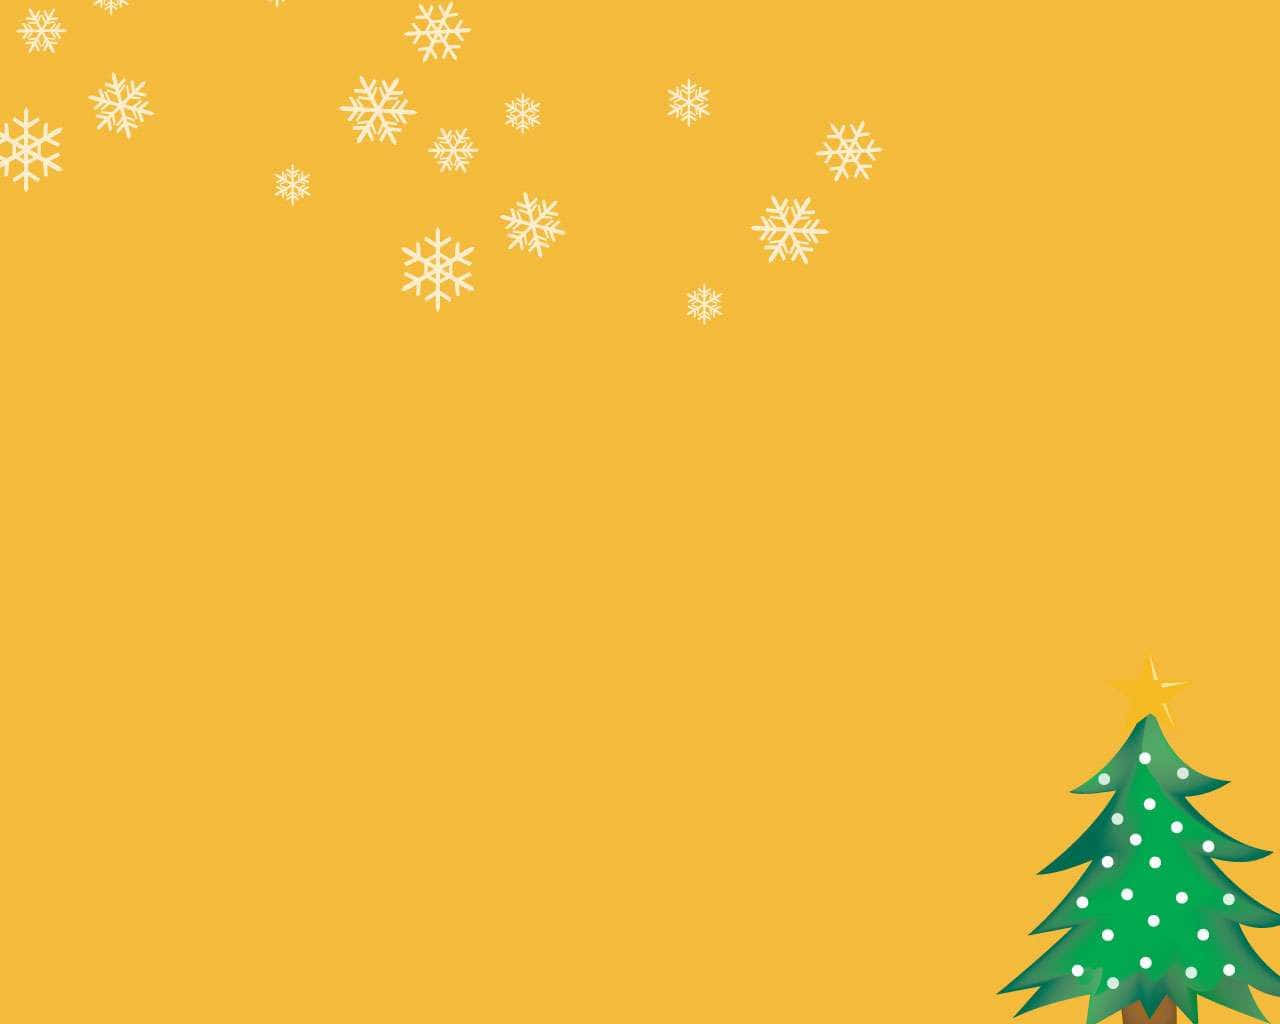 Beautify your Christmas presentation with this amazing, festive PowerPoint background